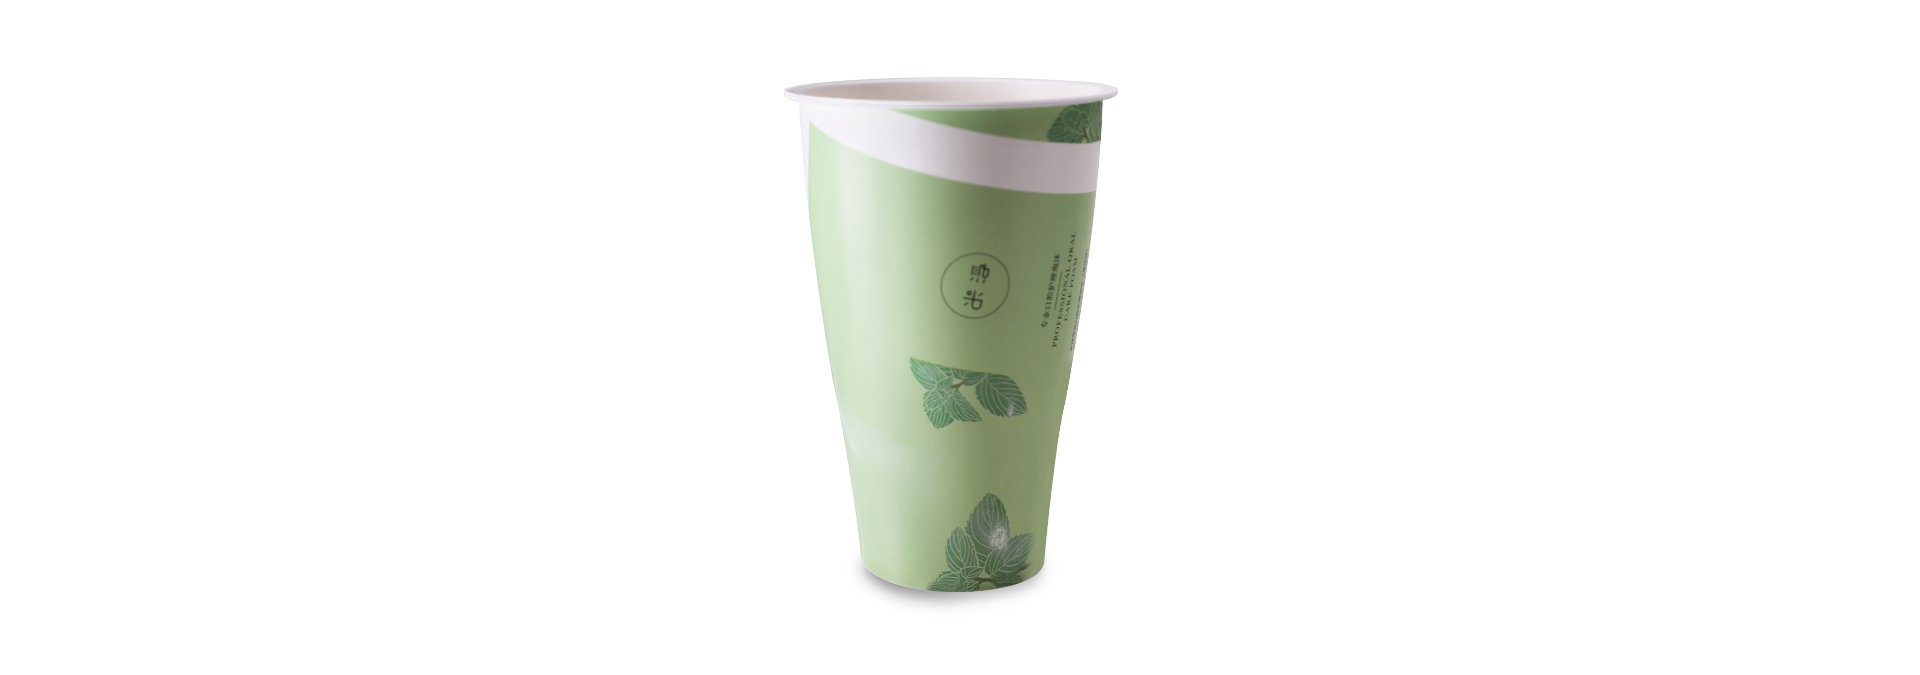 350ml curved cup (81 calibre)